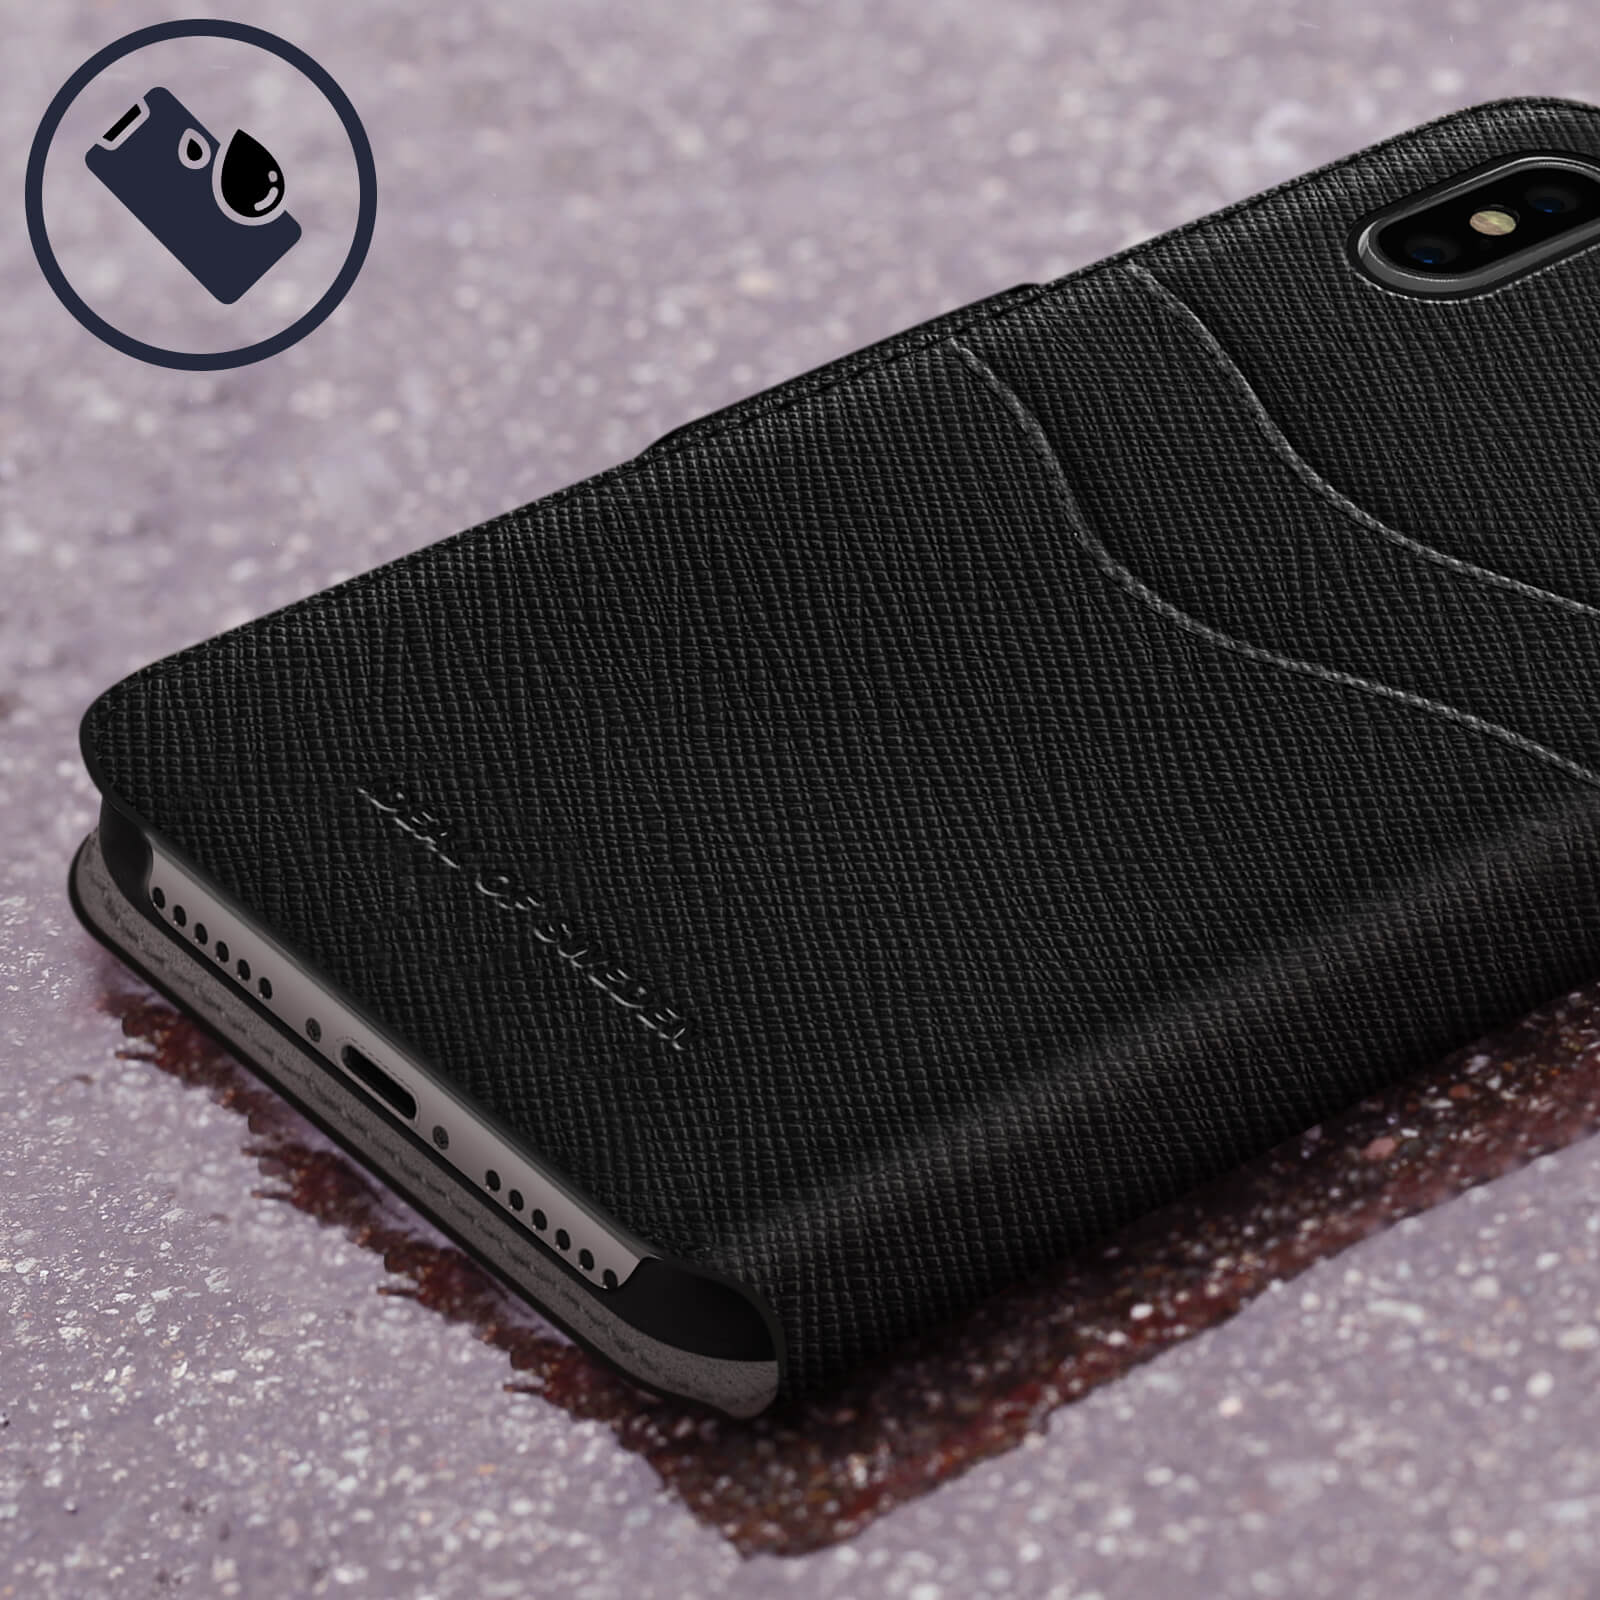 Full Cover, IDFW-I8-01, X, iPhone IDEAL Black SWEDEN iPhone XS, OF Apple,